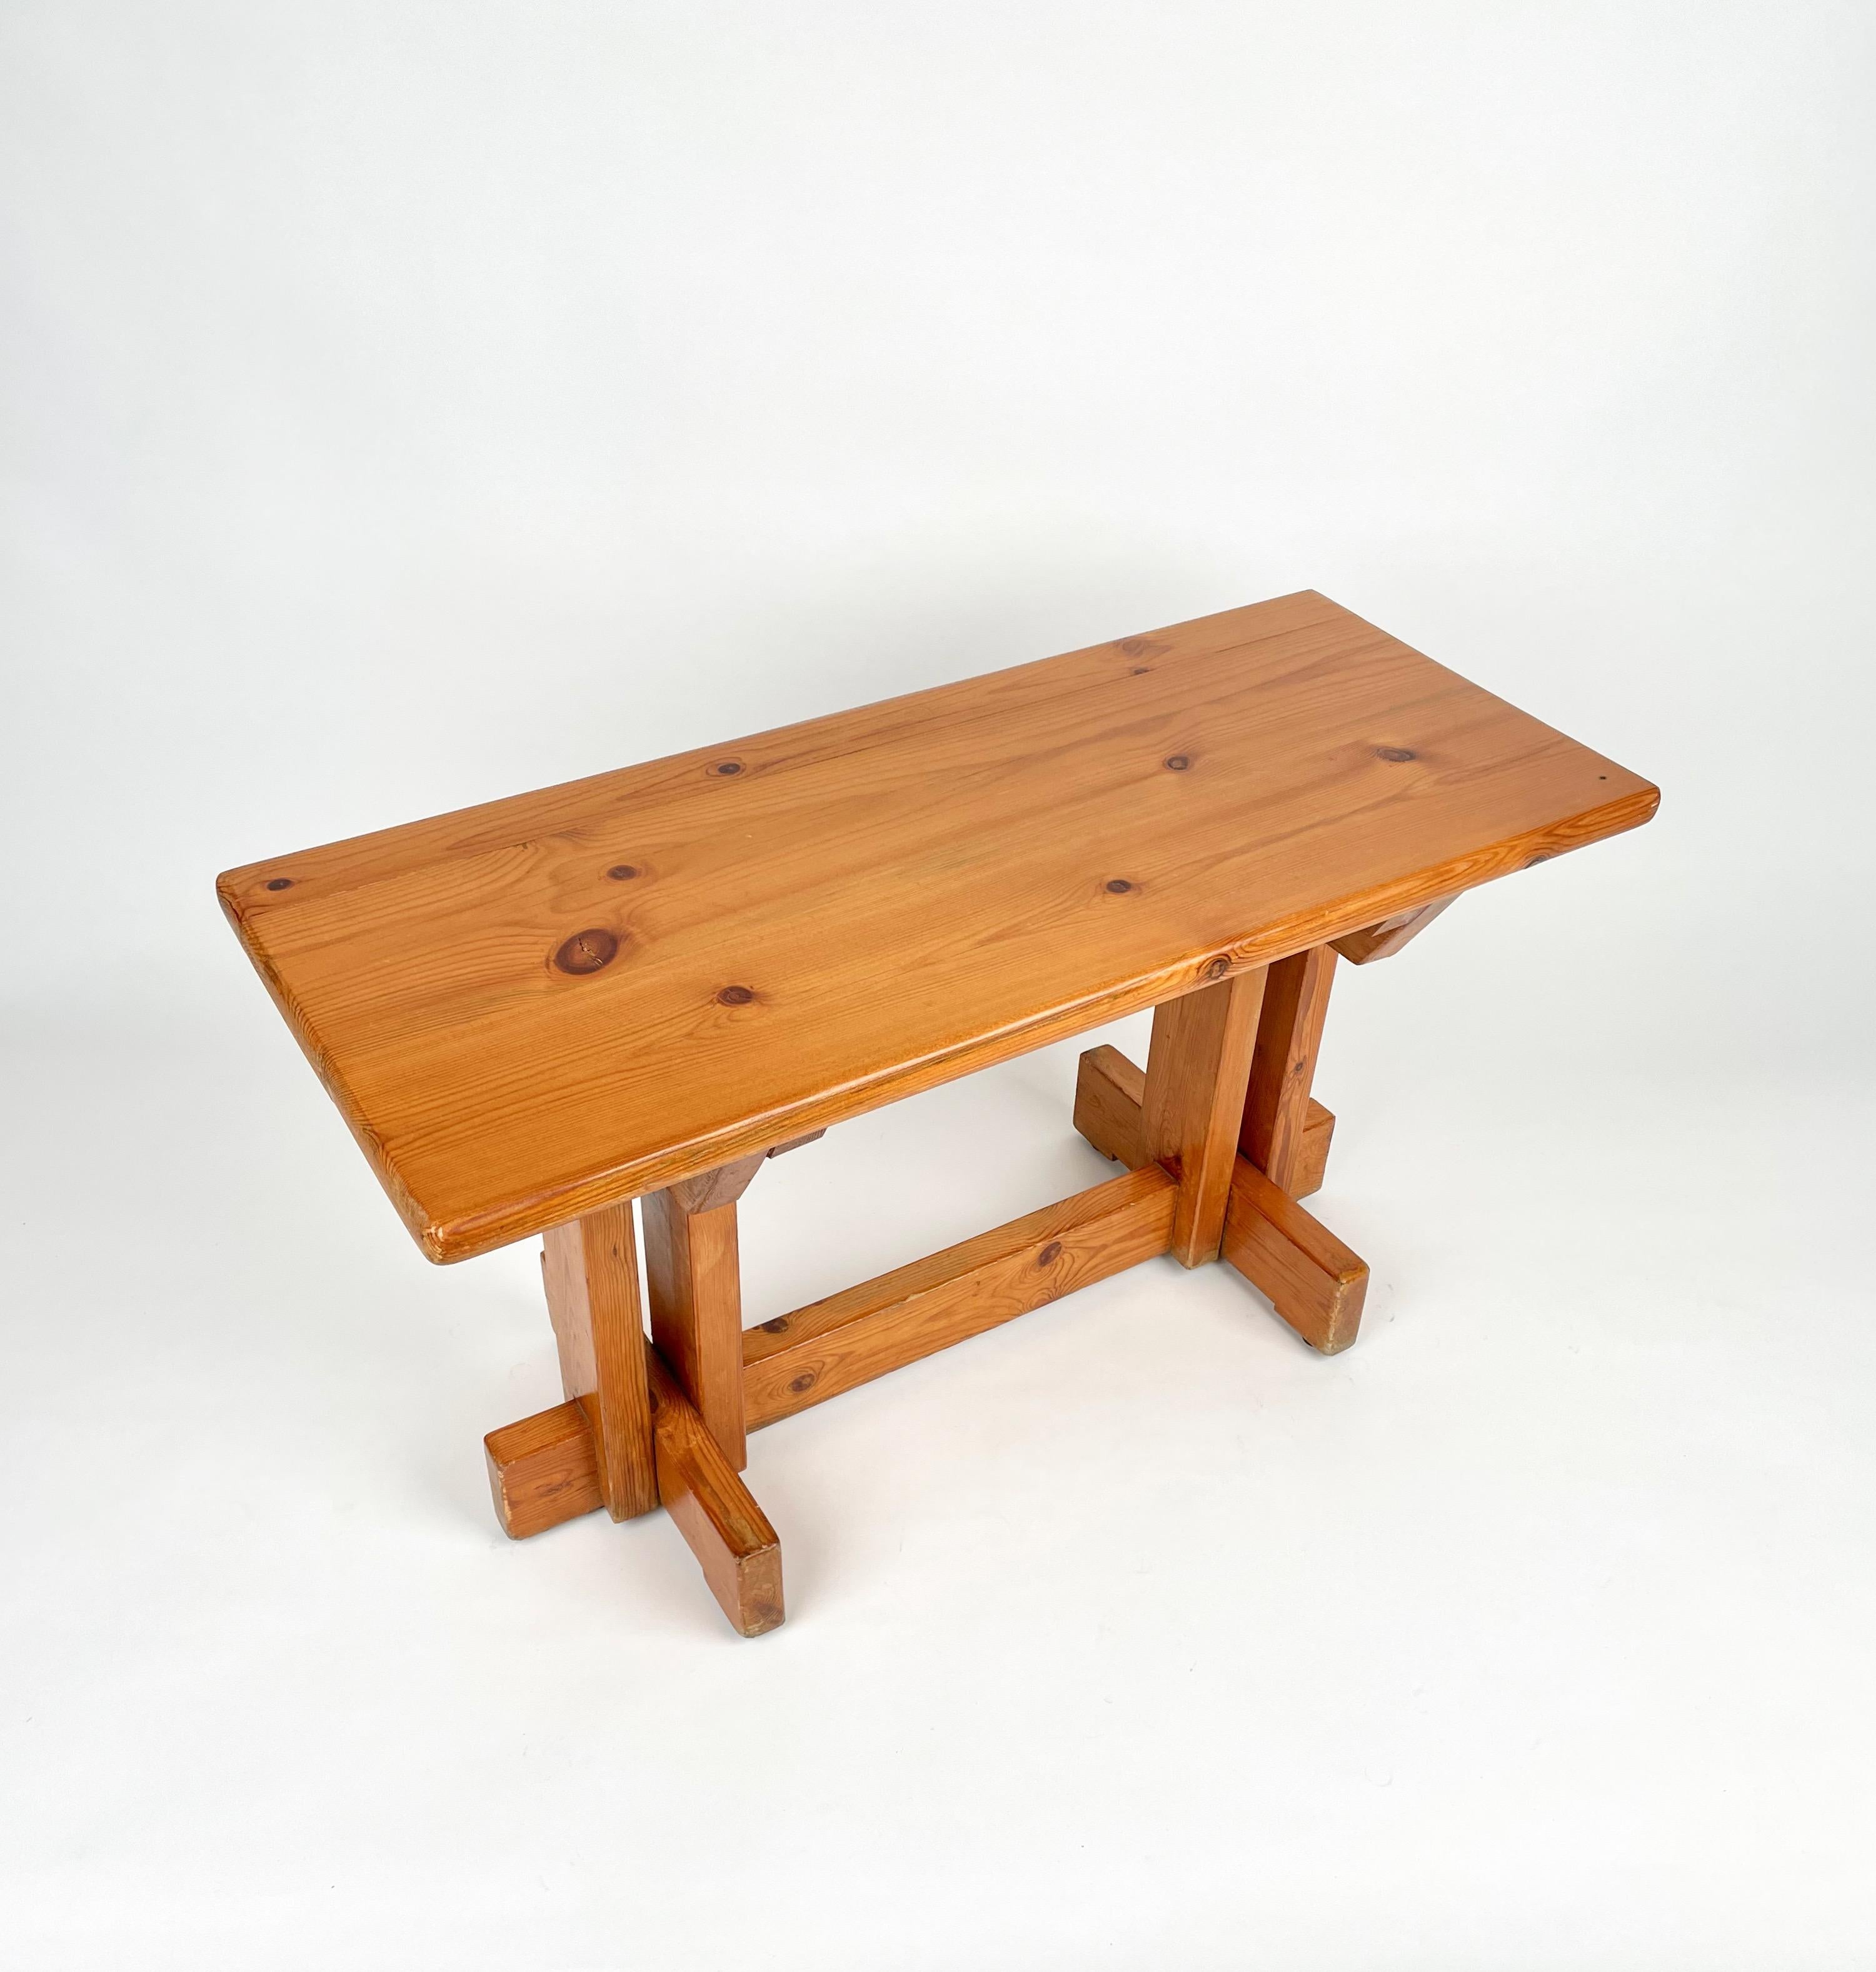 Charlotte Perriand Style Sitting Bench or Side Table in Wood Pine, France, 1970s For Sale 5